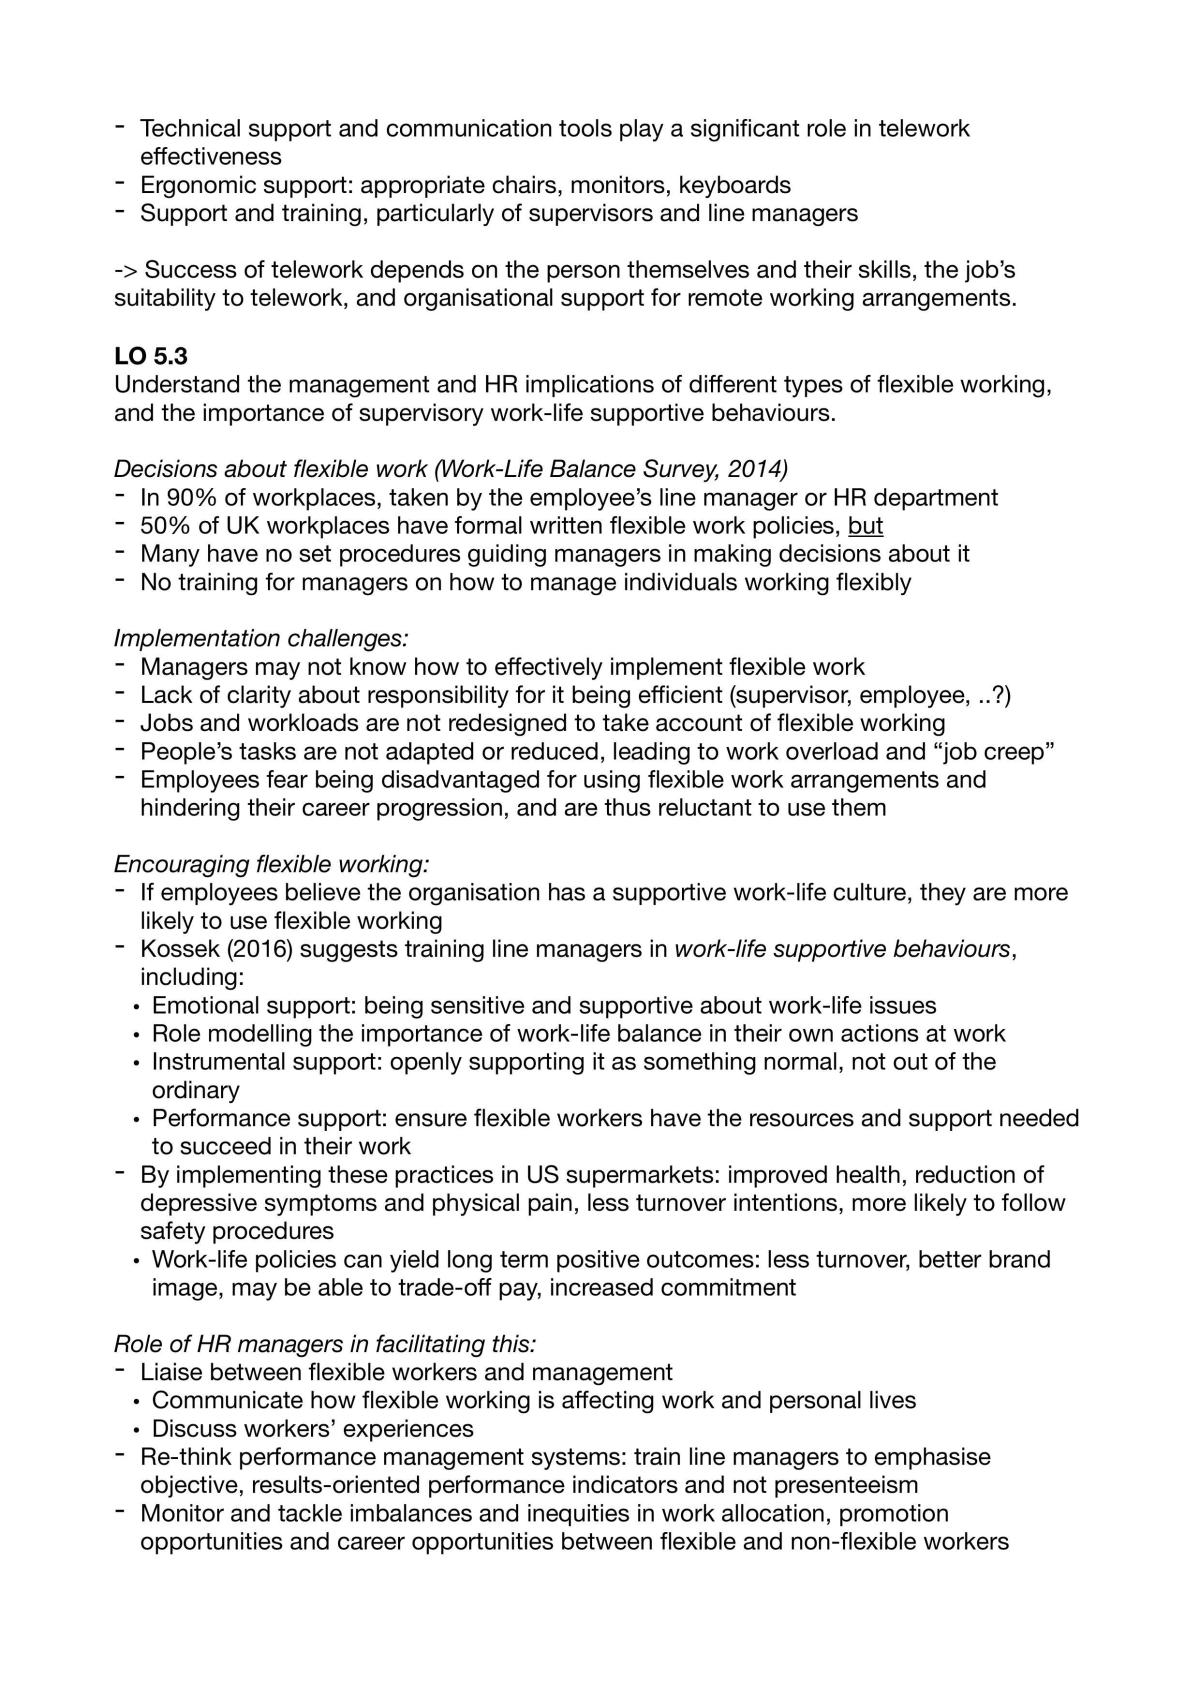 The New Workforce - Issues and Challenges - Page 45